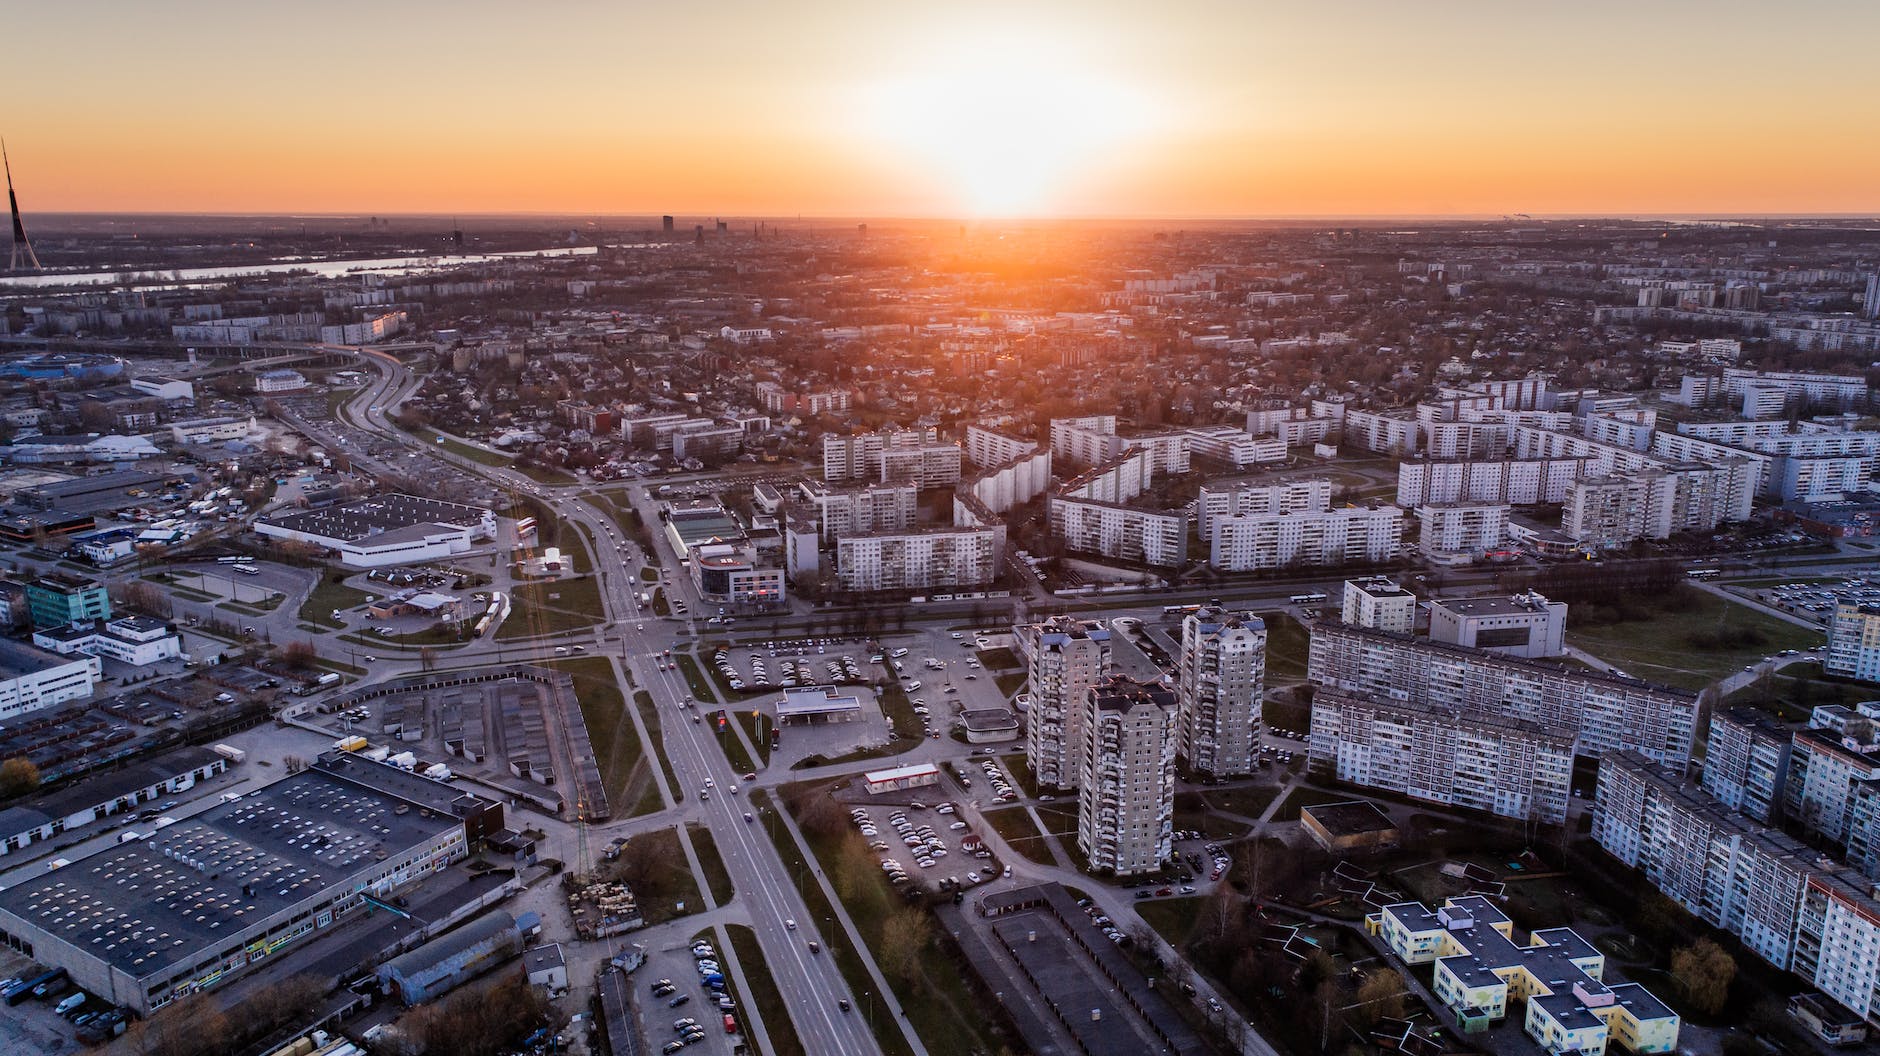 aerial photo of high rise building during sunrise